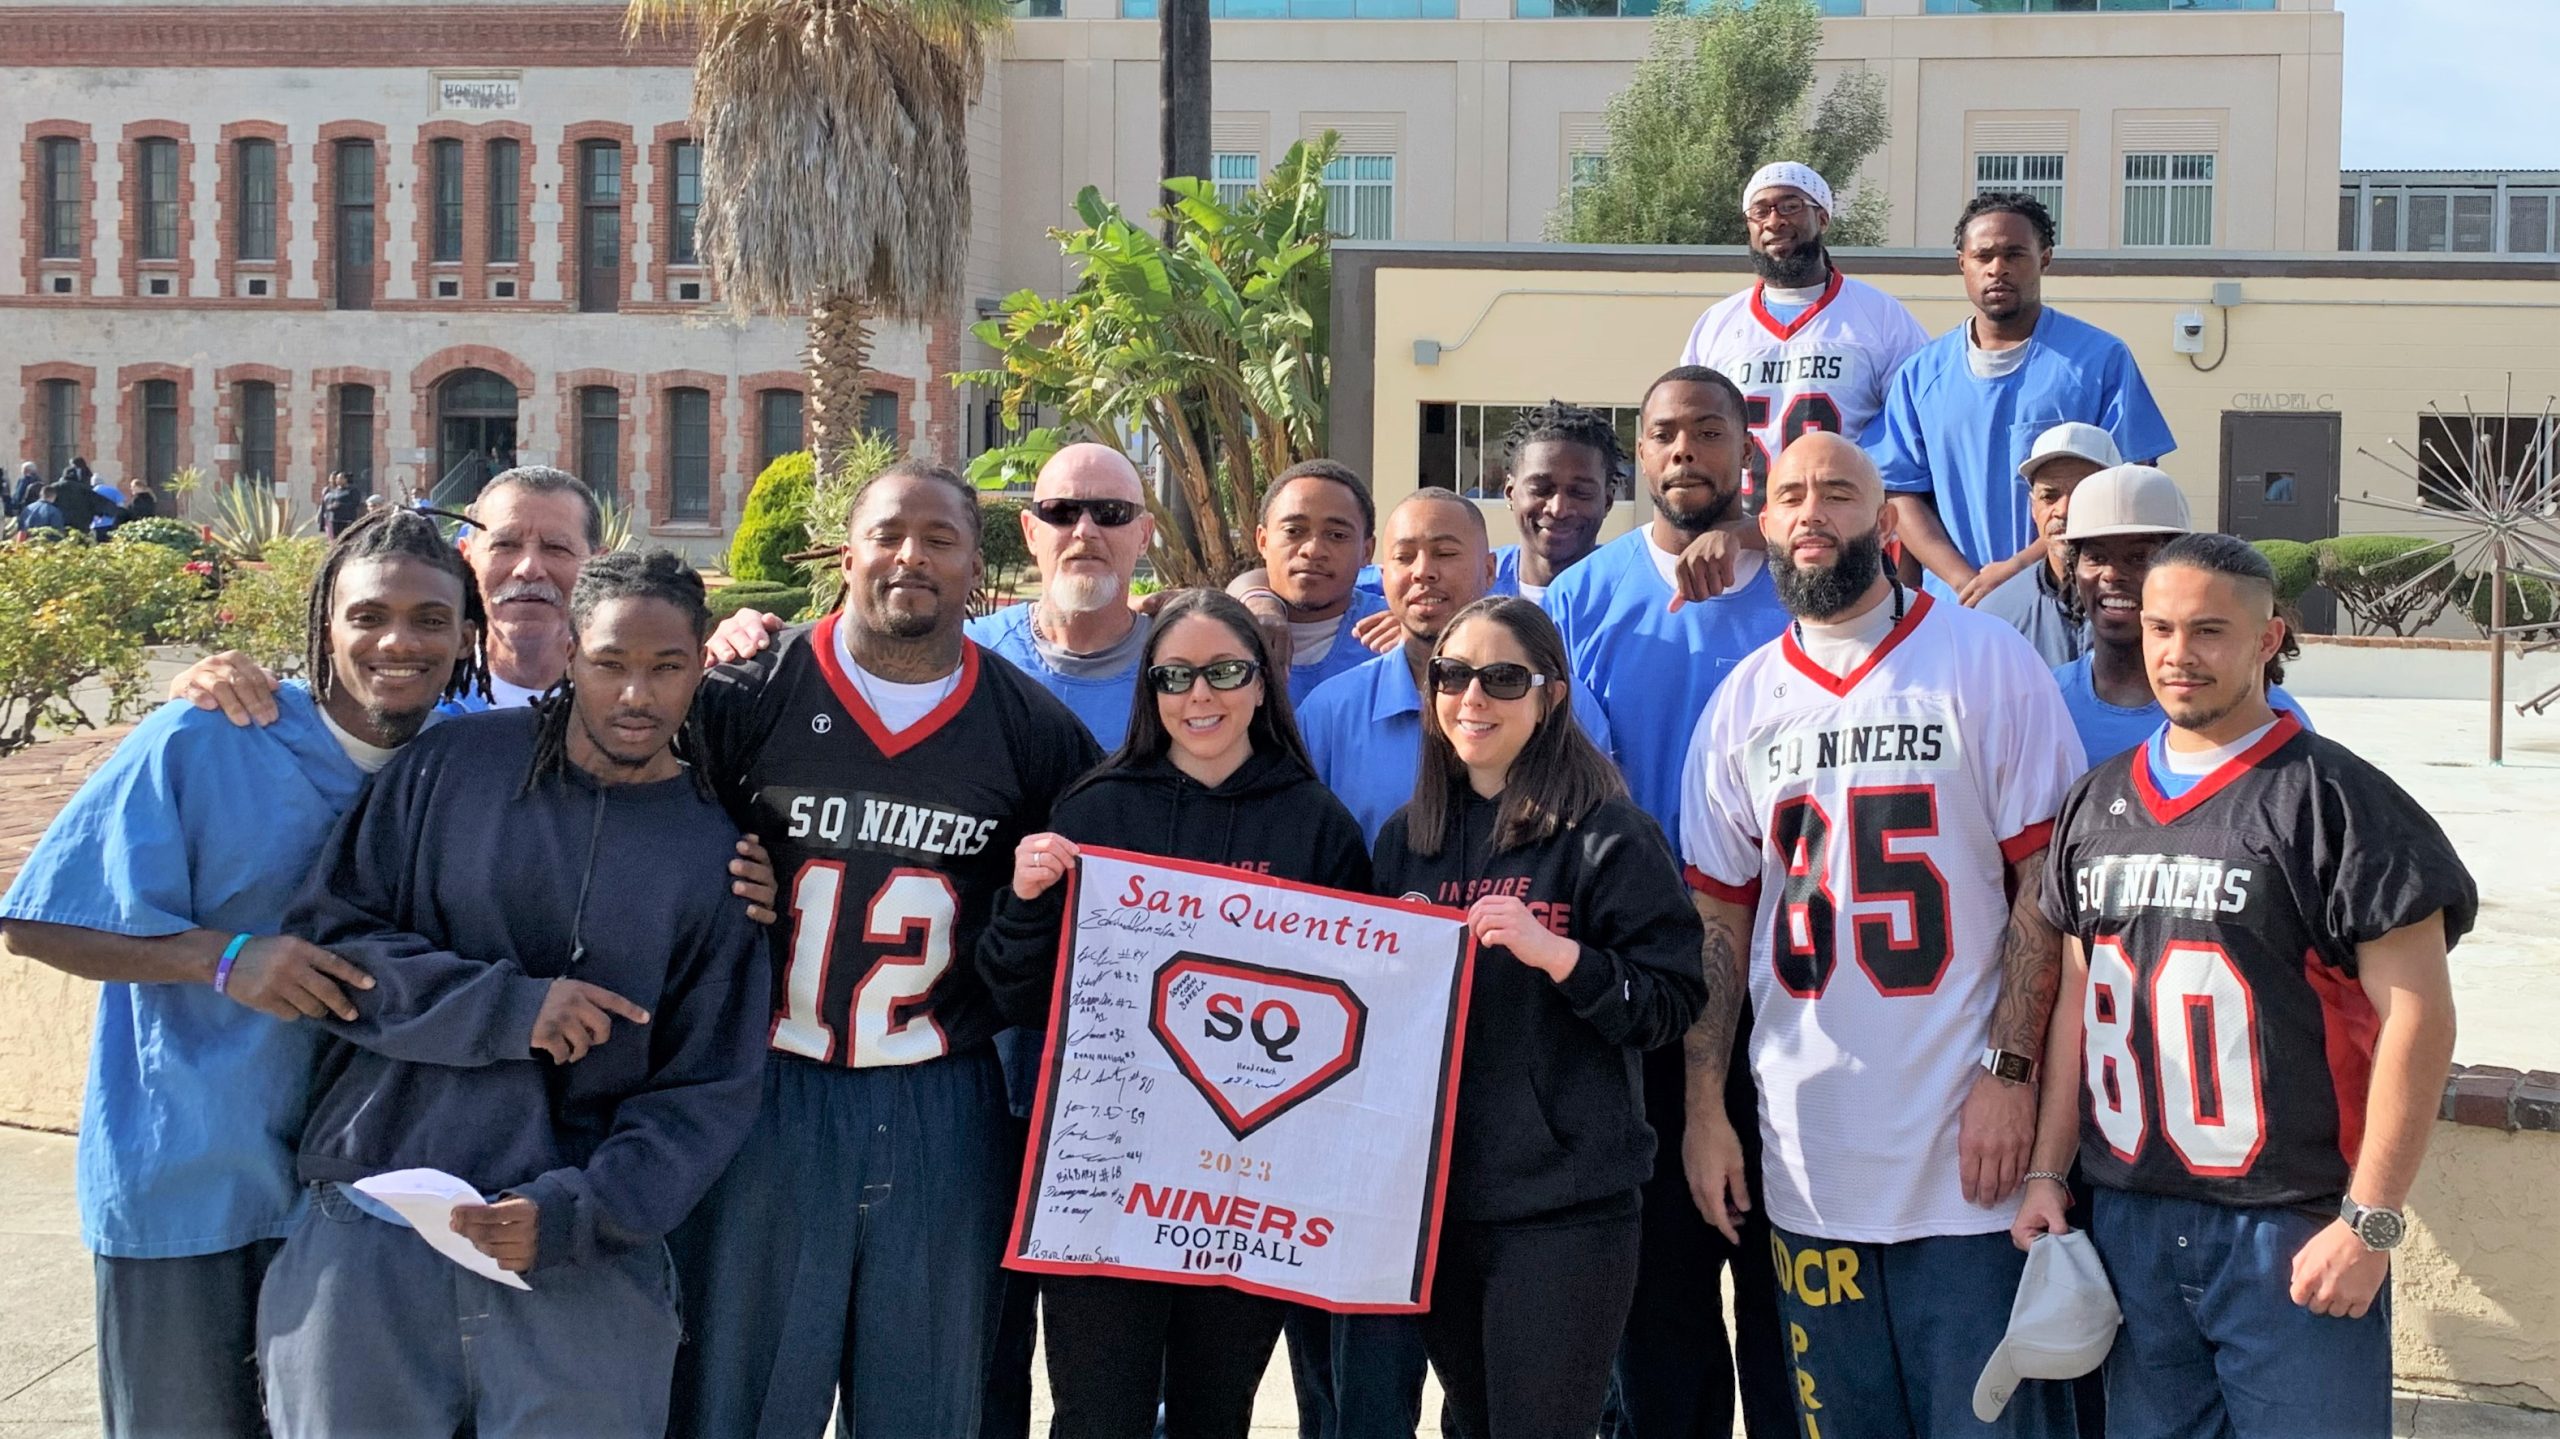 A group of people, some wearing football jerseys and holding a San Francisco 49ers sign, pose for a photo with incarcerated people inside San Quentin Rehabilitation Center.